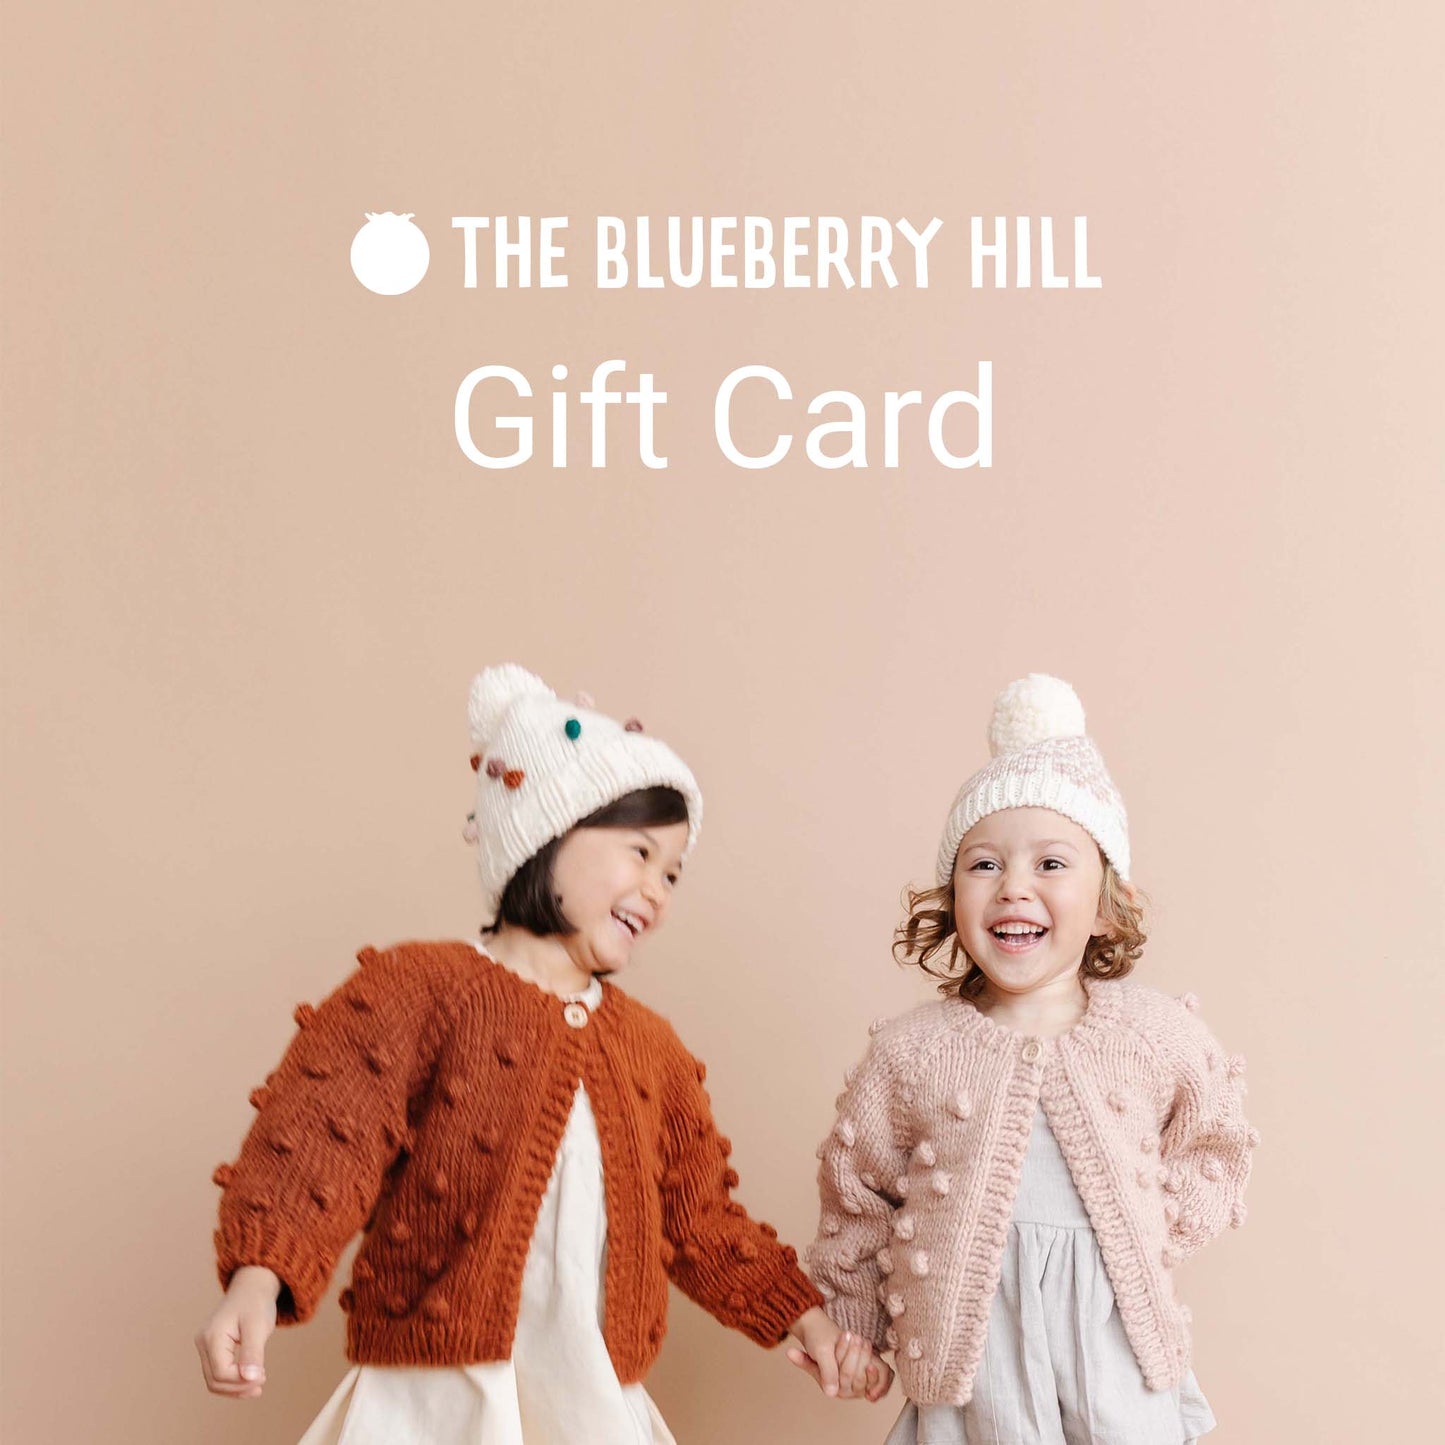 The Blueberry Hill Gift Card